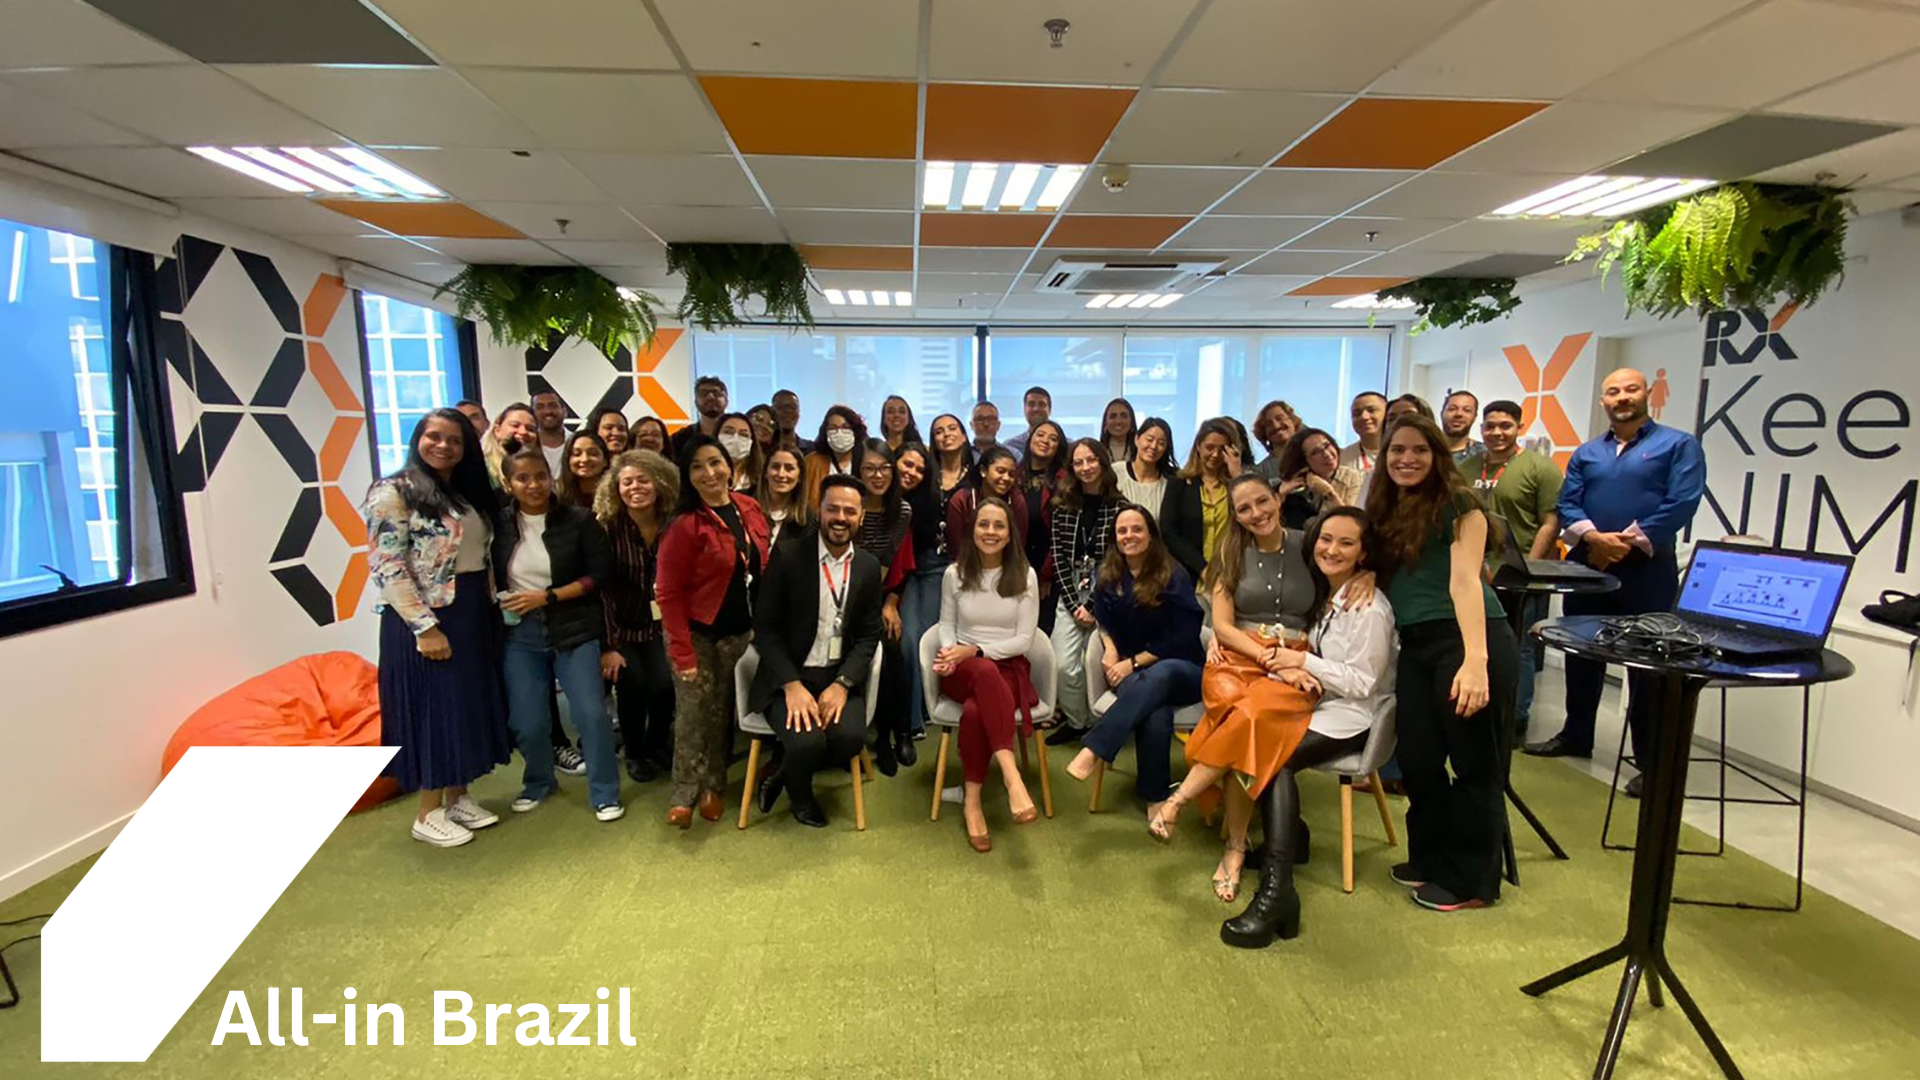 Team photo of Inclusion group: RX All-in Brazil ERG gathered together in the office HUB